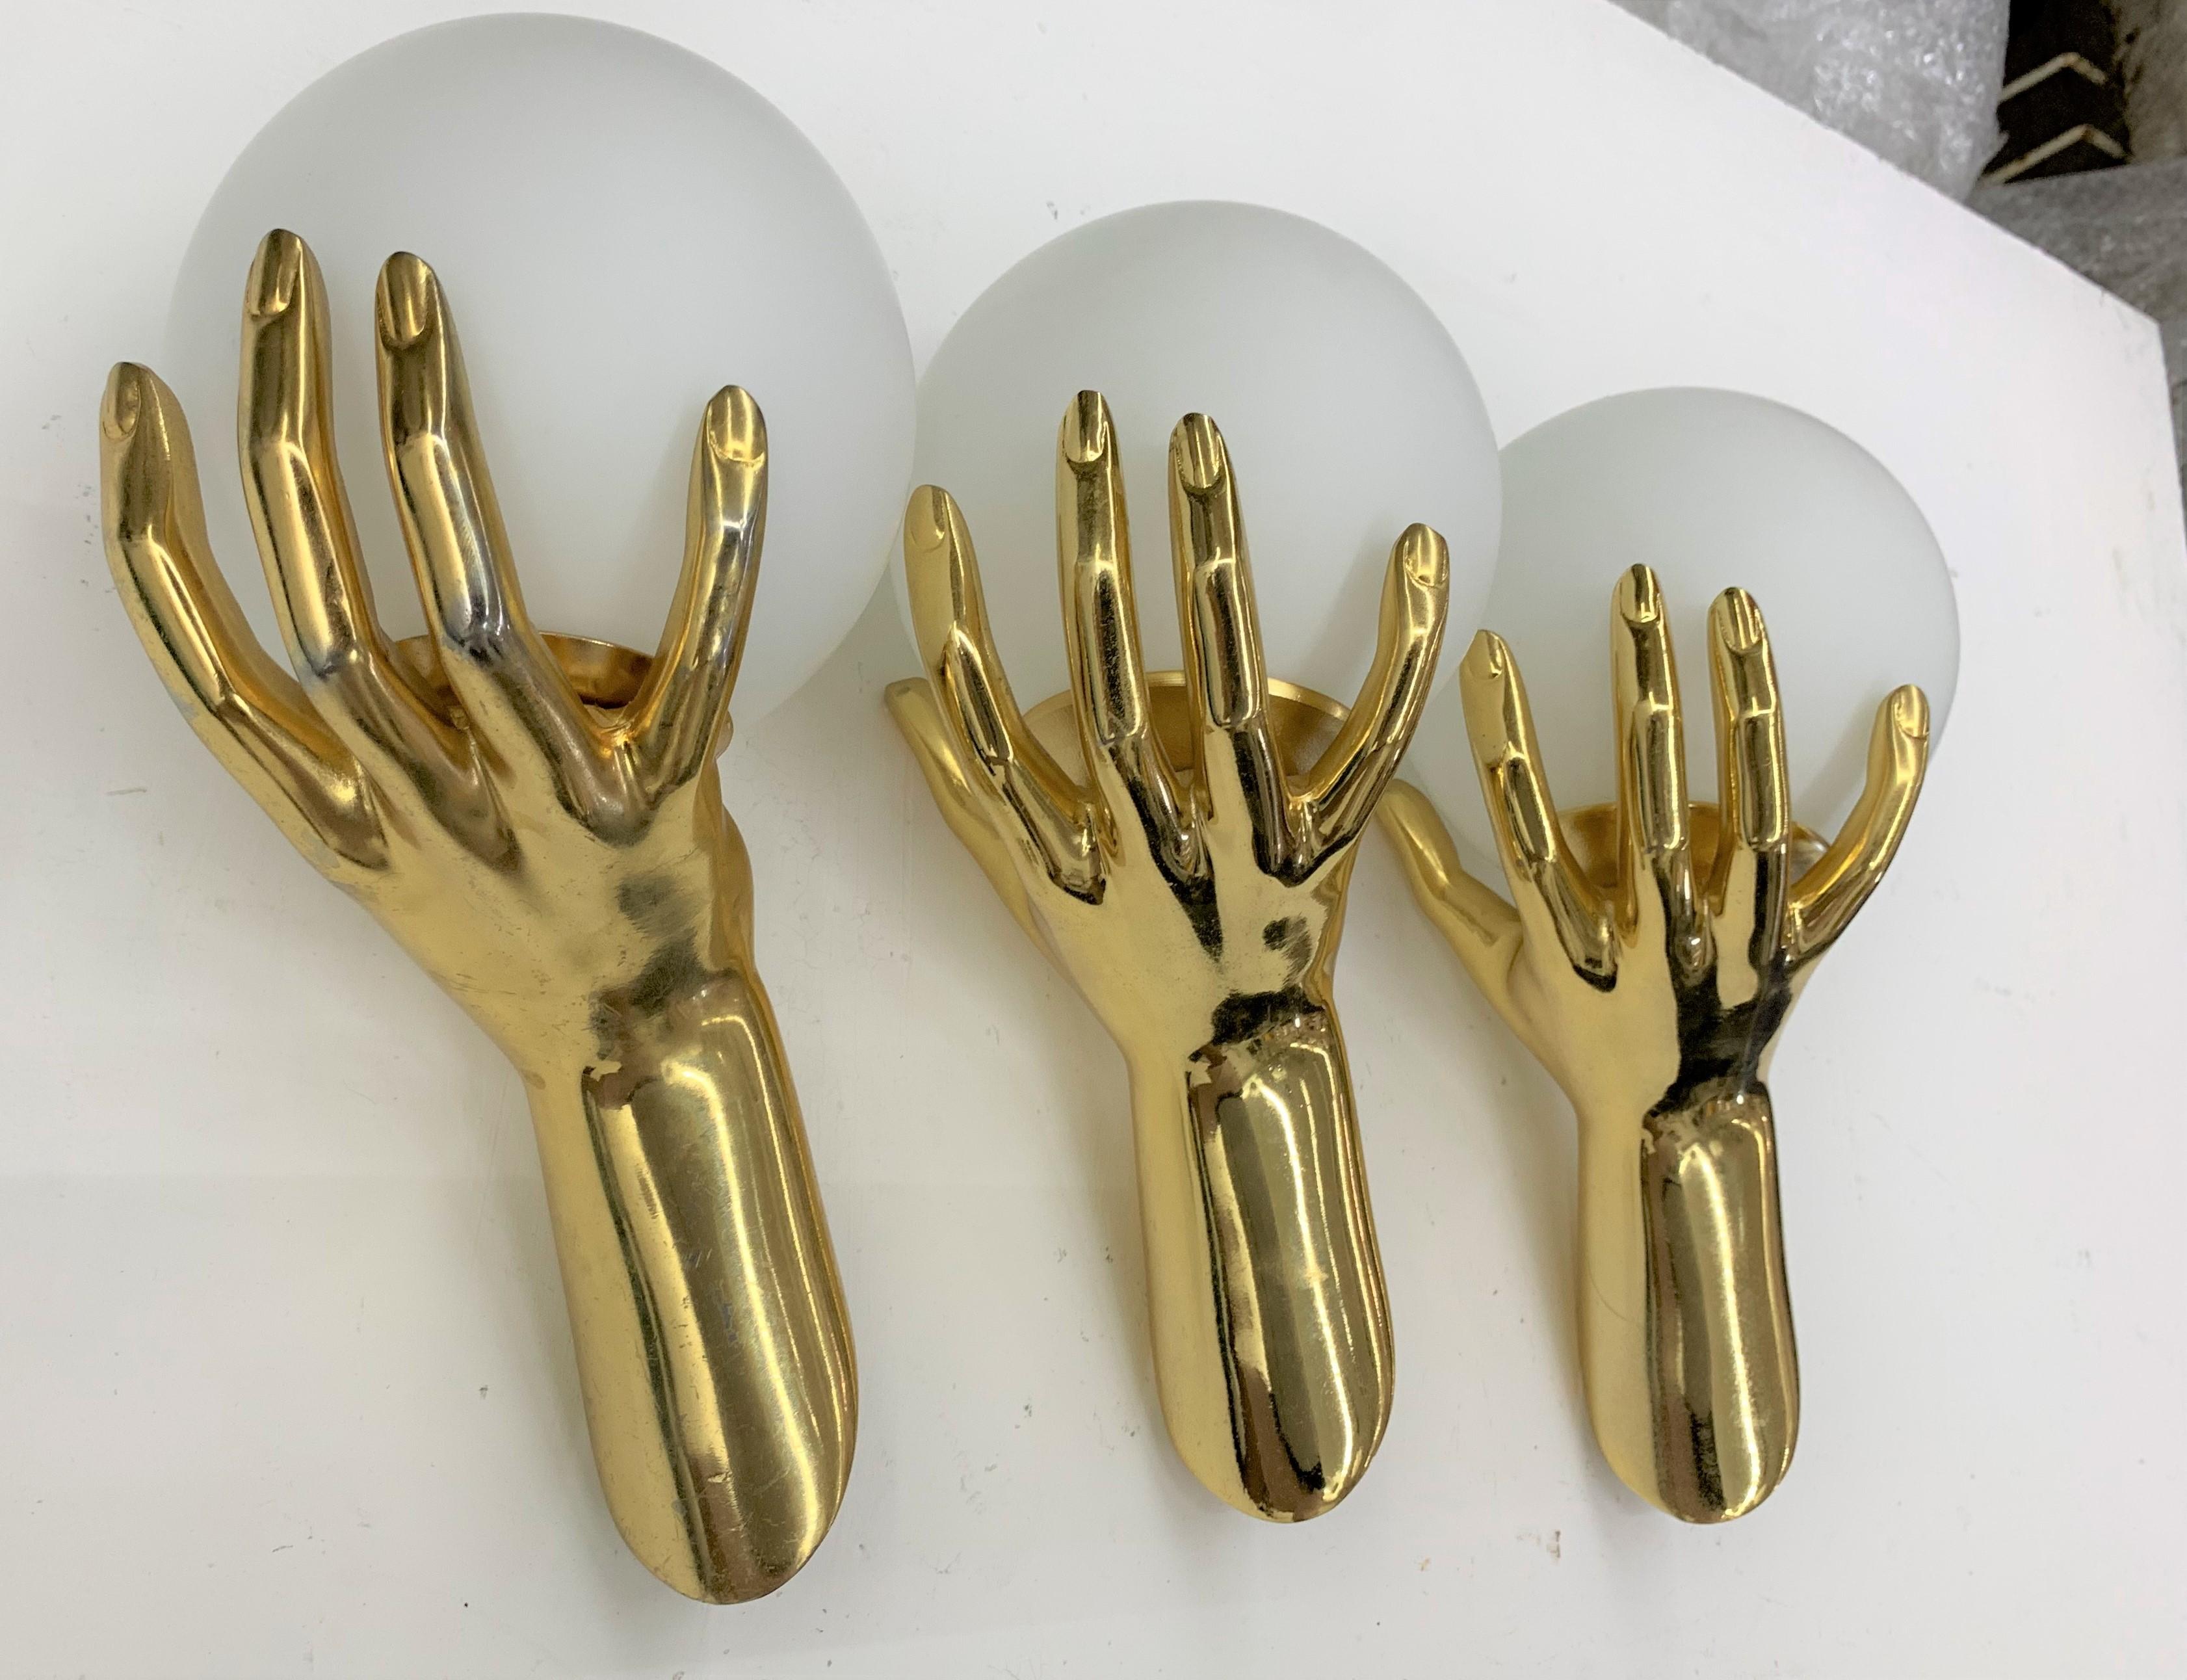 Mid-20th Century Modernist Sconces by Maison Arlus in Gilt Bronze and Opaline Glass, France